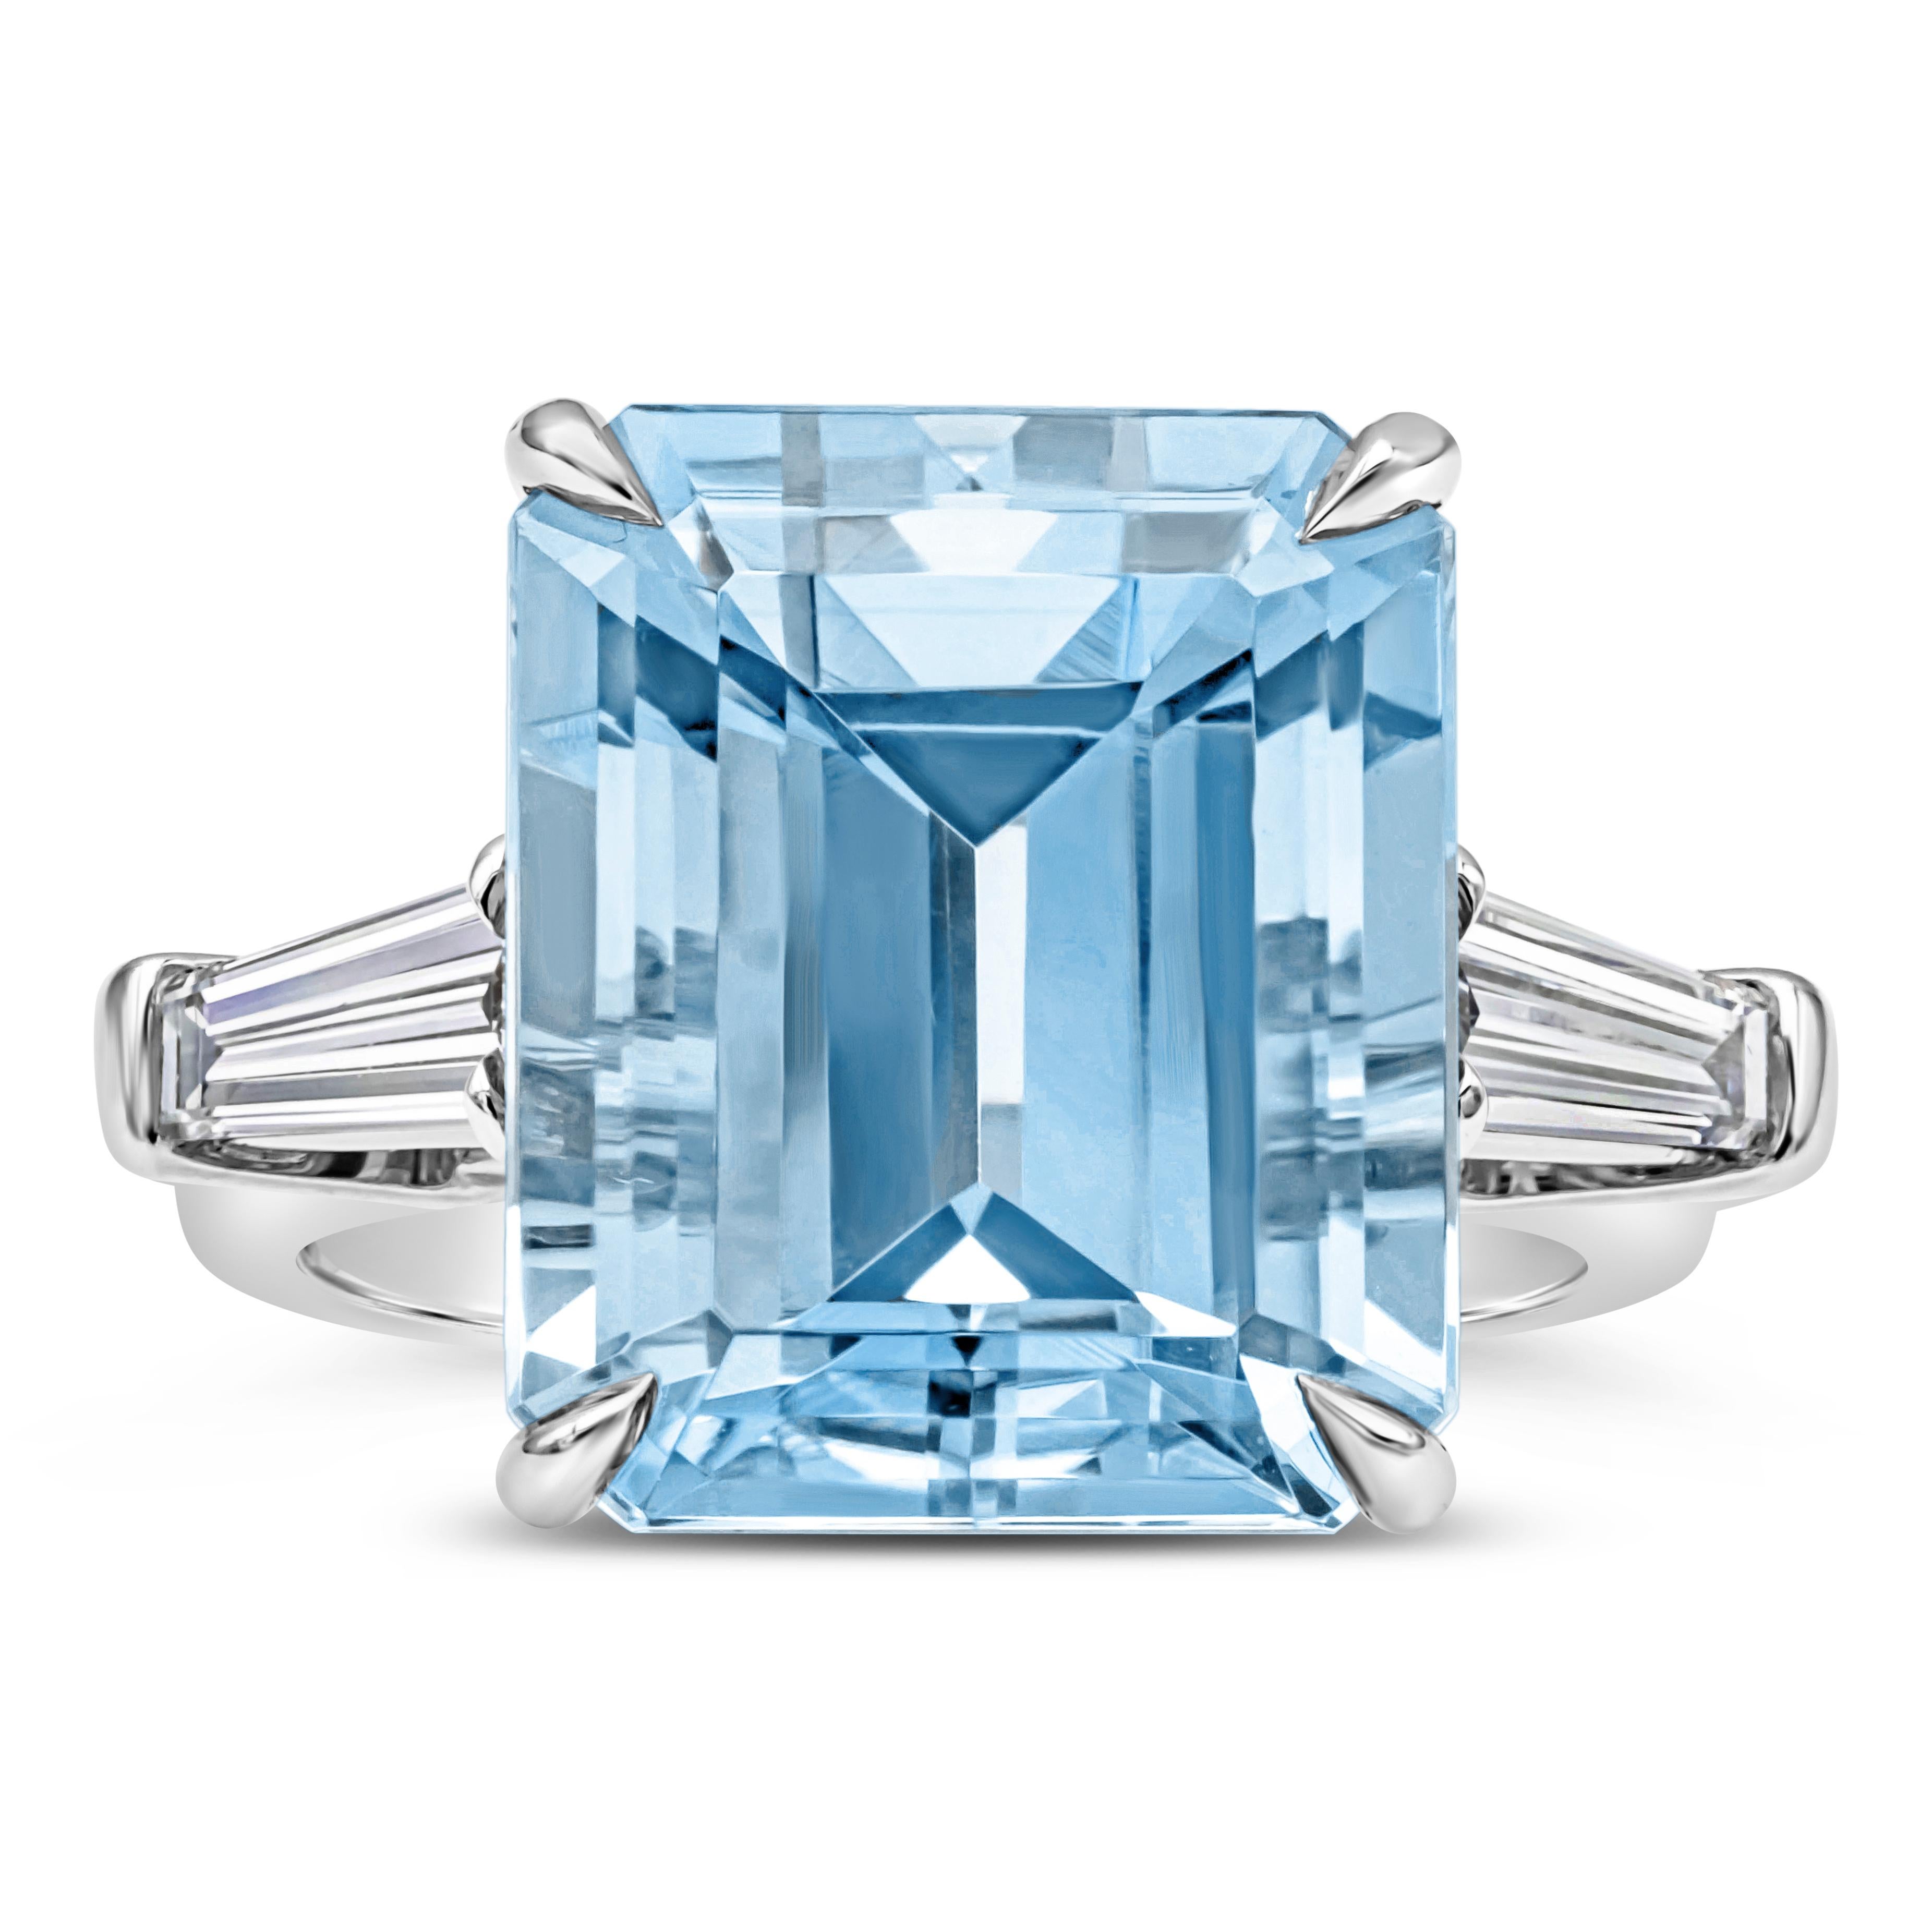 A gorgeous and sleek three stone engagement ring, featuring a 9.73 carats emerald cut Santa-Maria blue aquamarine center stone. Flanked by two GIA certified brilliant baguette cut diamonds weighing 0.78 carats total with E color and VS1-VVS clarity.